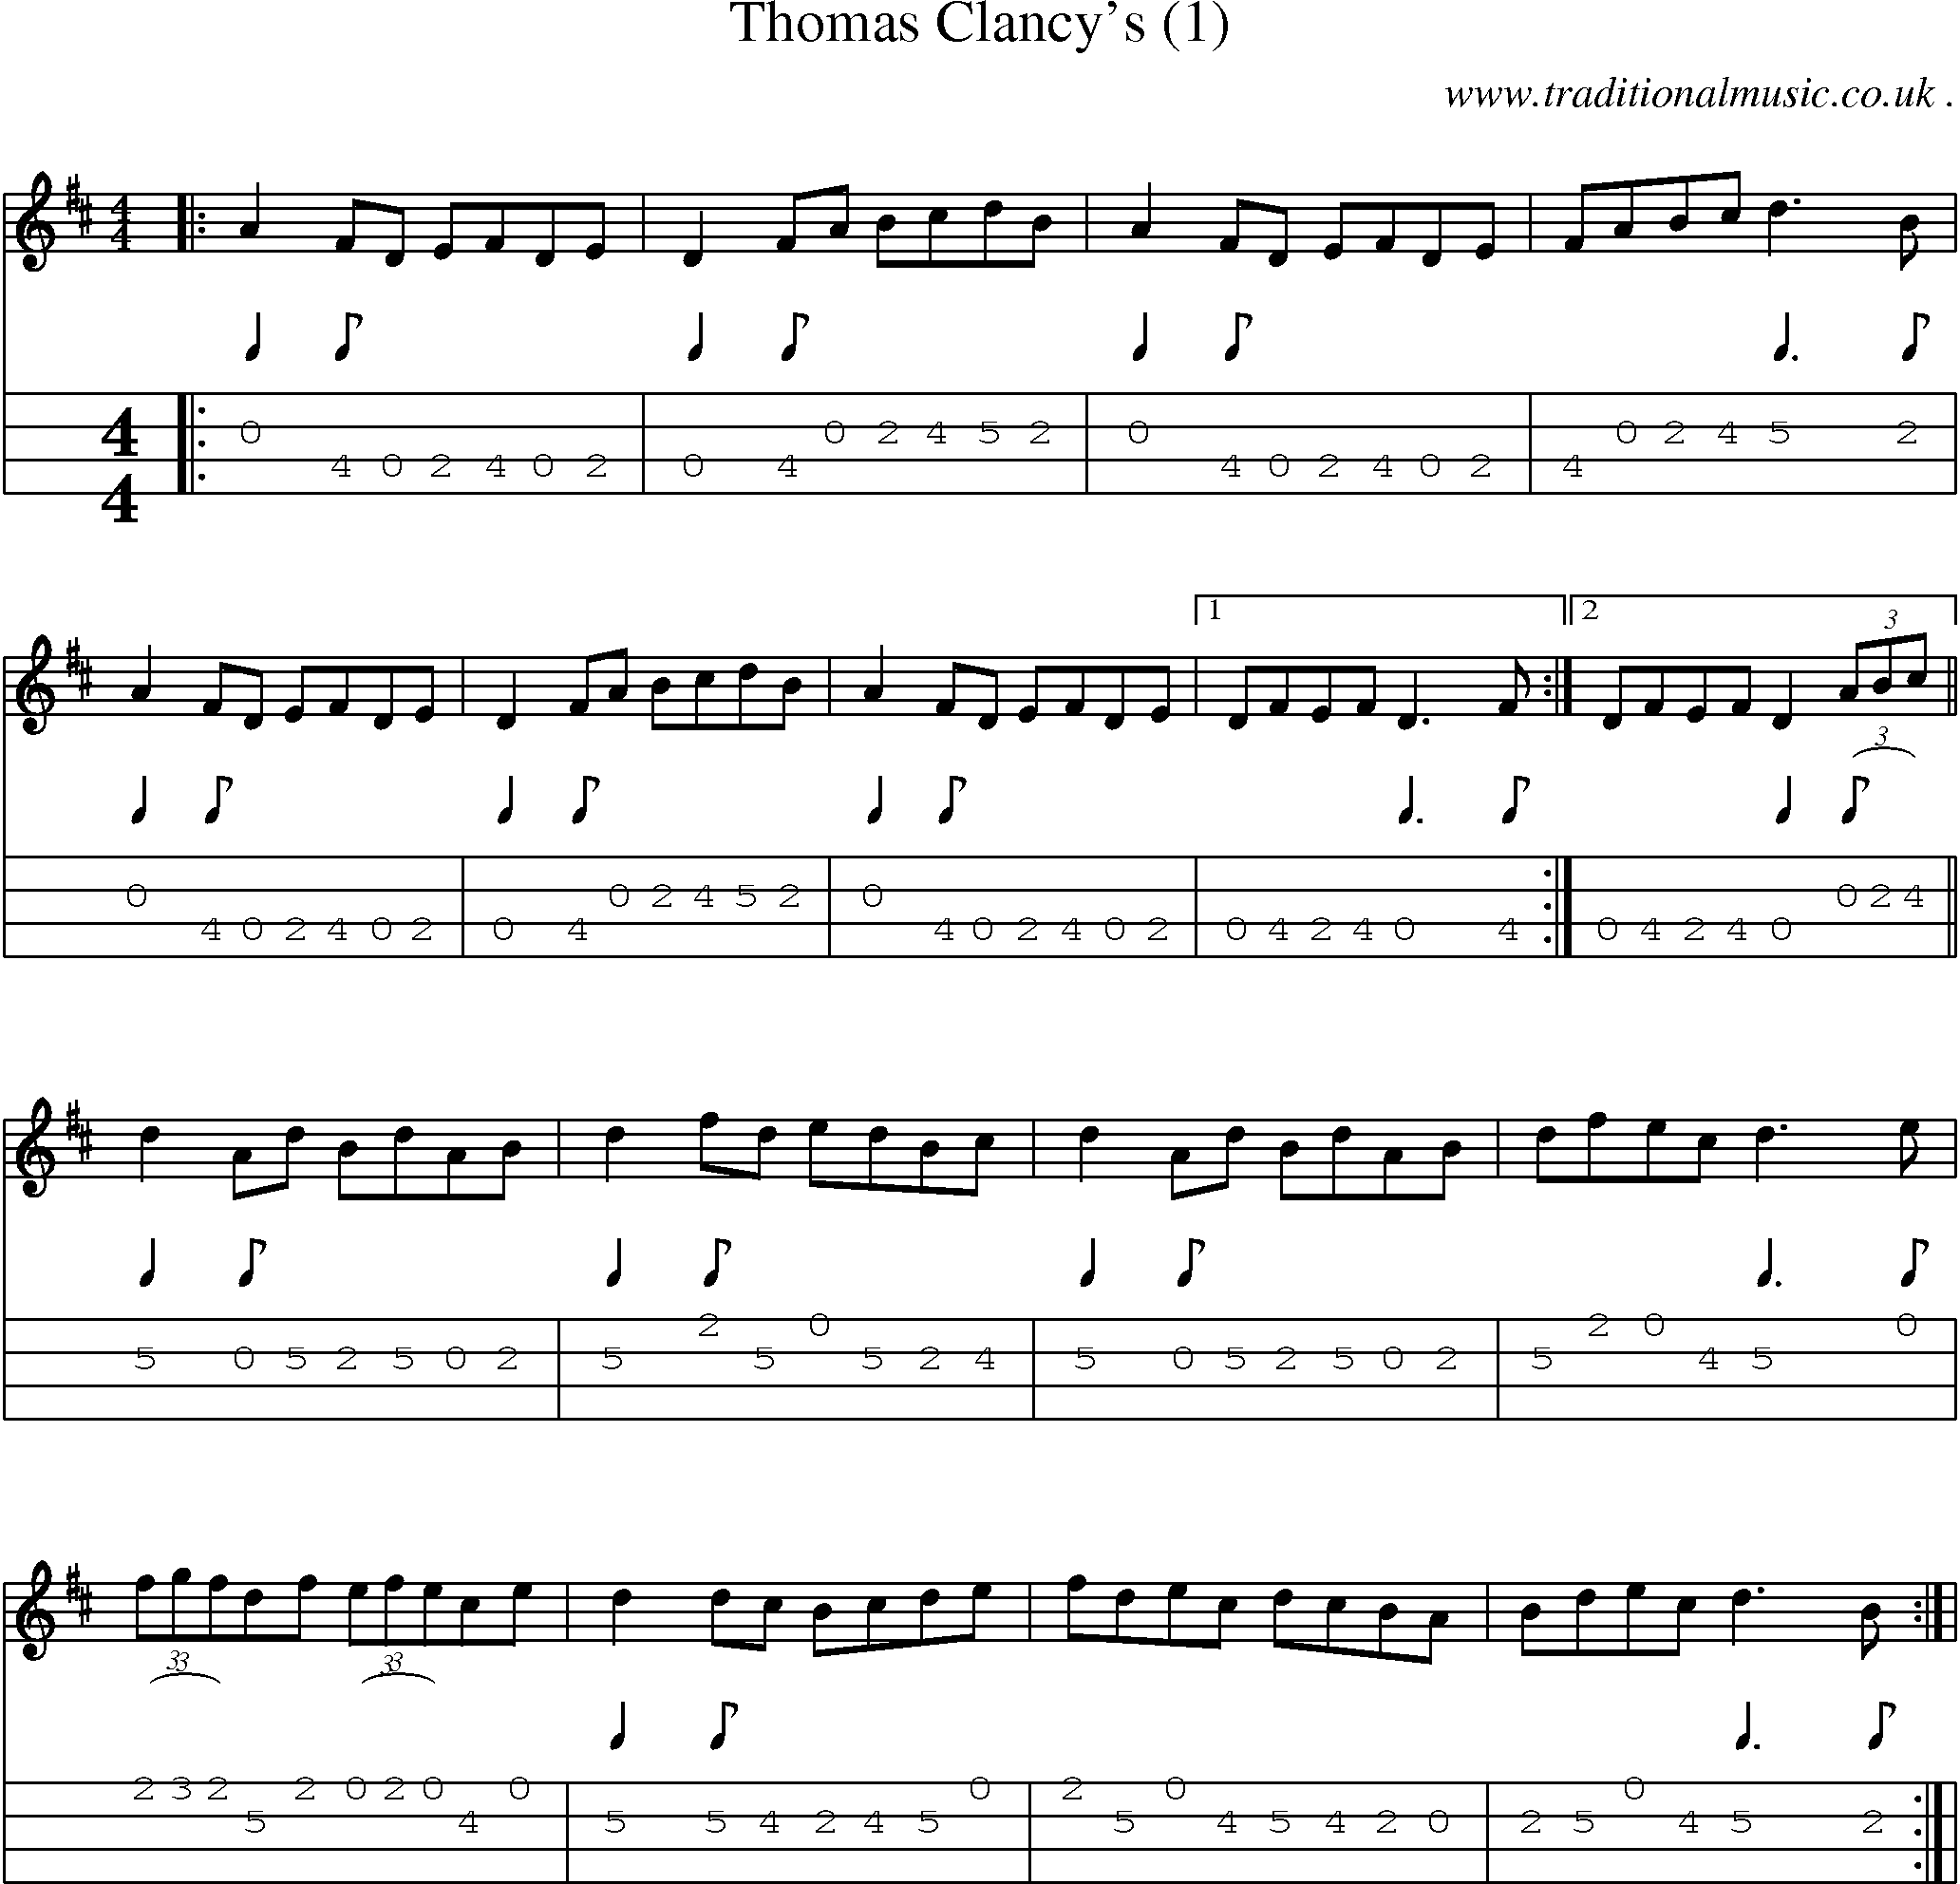 Sheet-Music and Mandolin Tabs for Thomas Clancys (1)